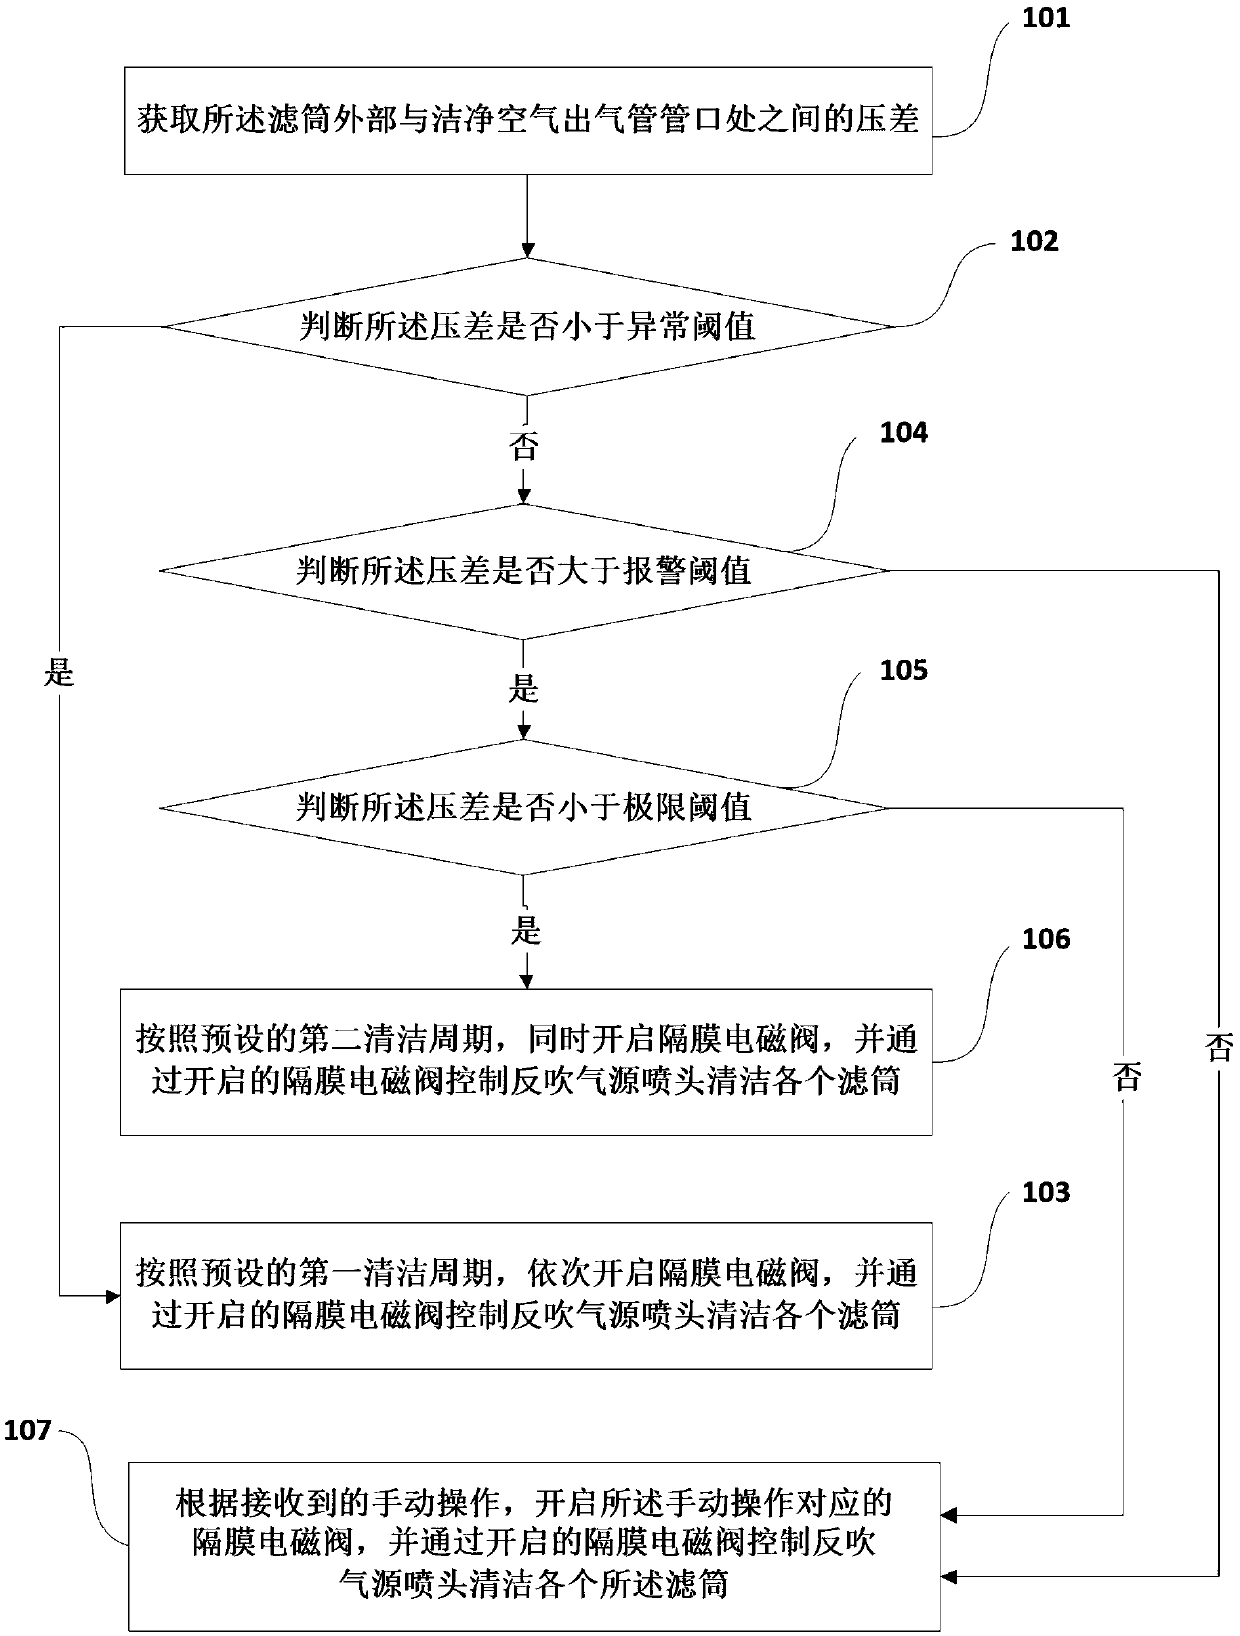 Air filter self-cleaning control method and air filter self-cleaning control device